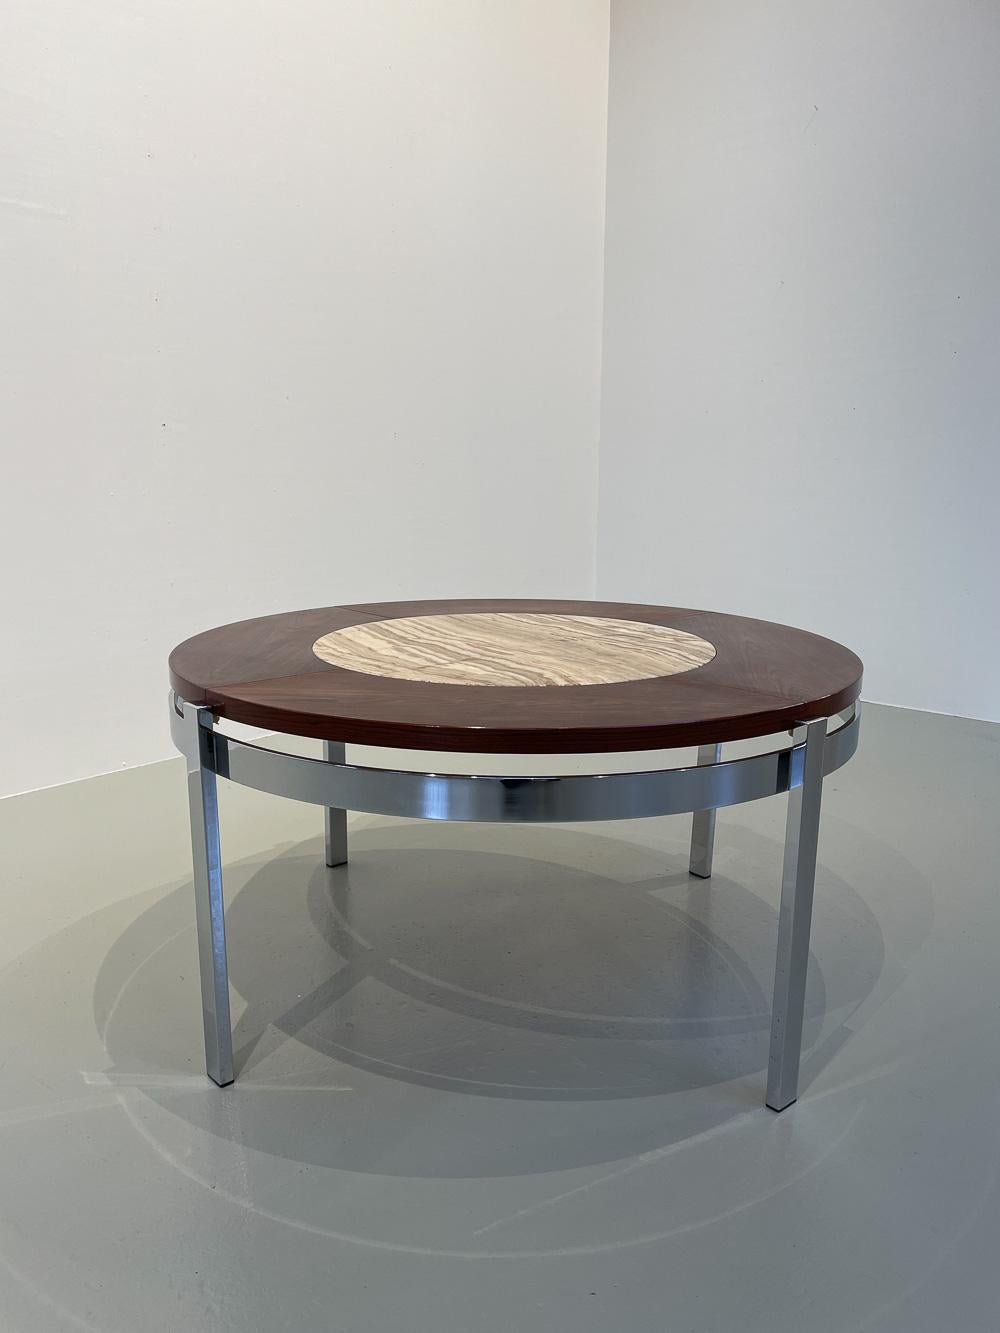 Danish Modern Round Rosewood and Marble Coffee Table by Bendixen Design, 1970s. For Sale 3